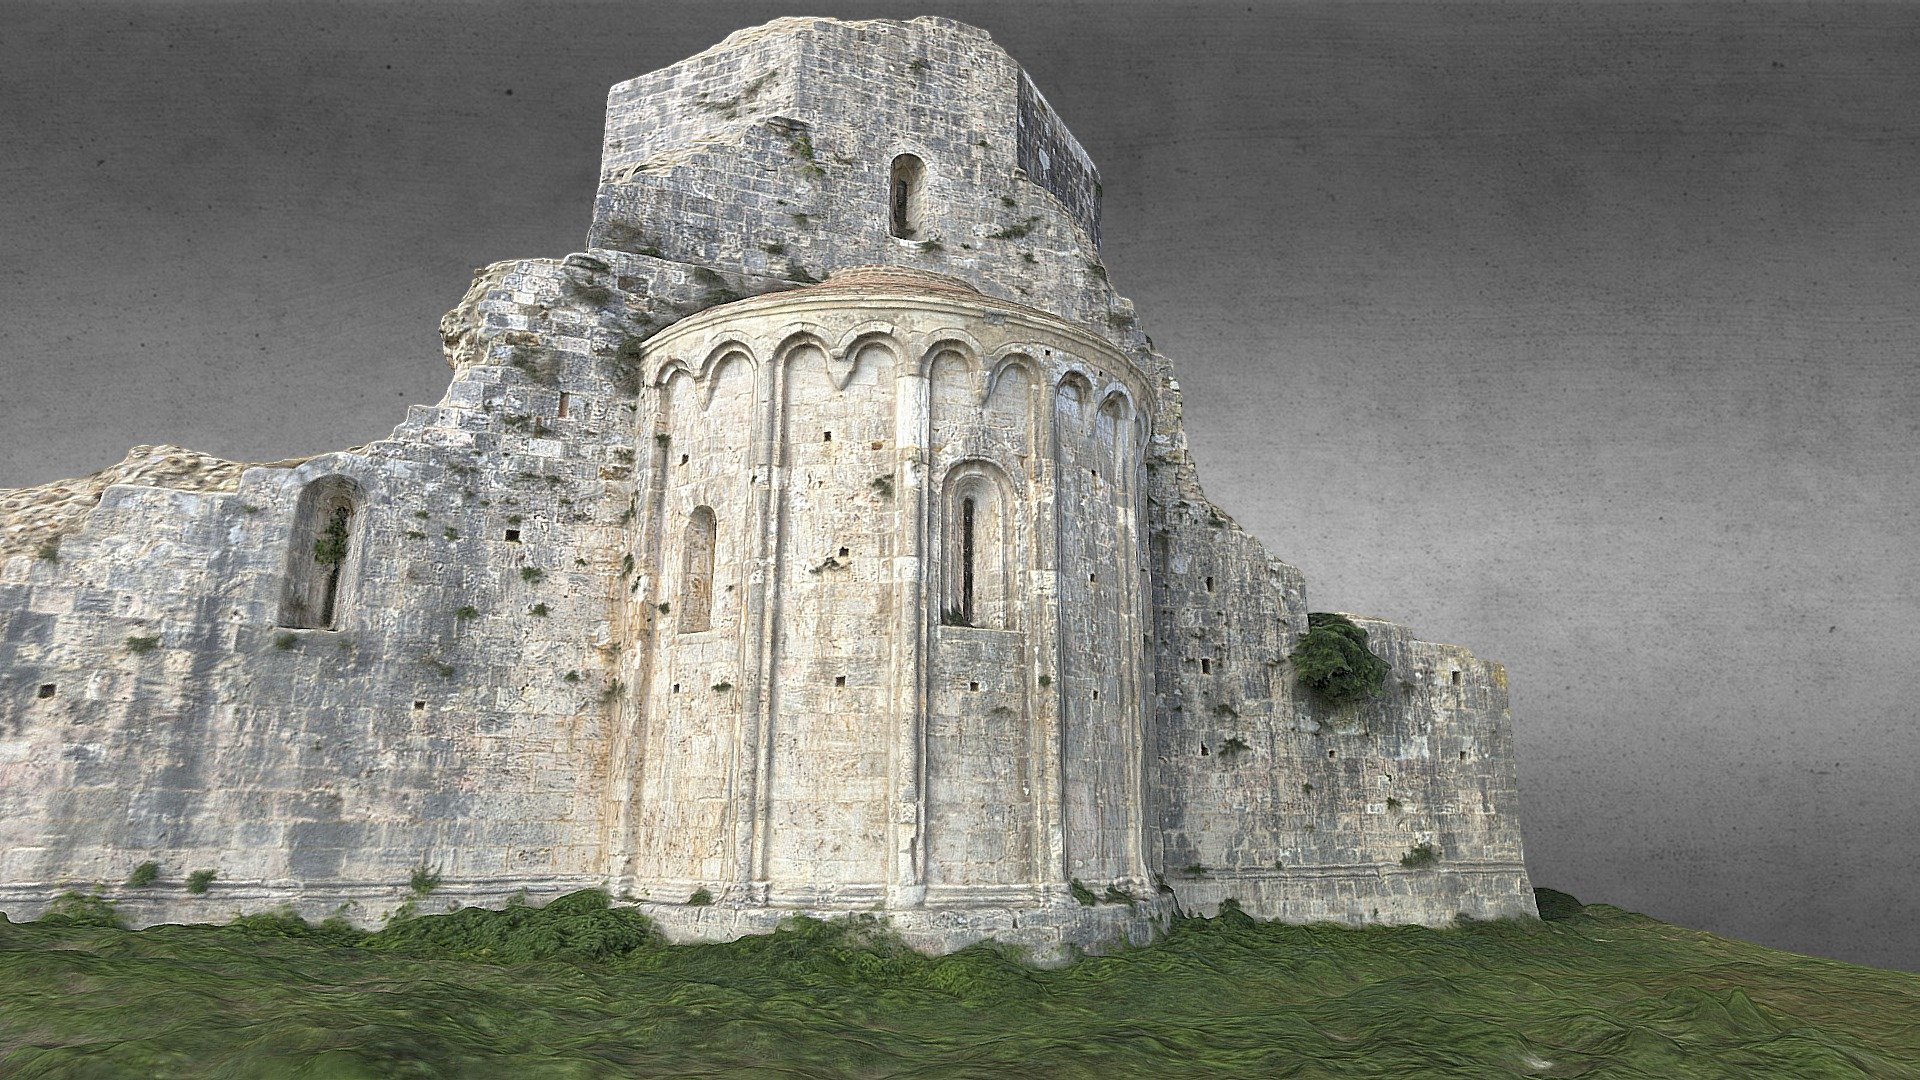 Low resolution 3D model obtained with close range photogrammetry , using terrestrial and UAV images - San Bruzio - 3D model by ATS 3d model